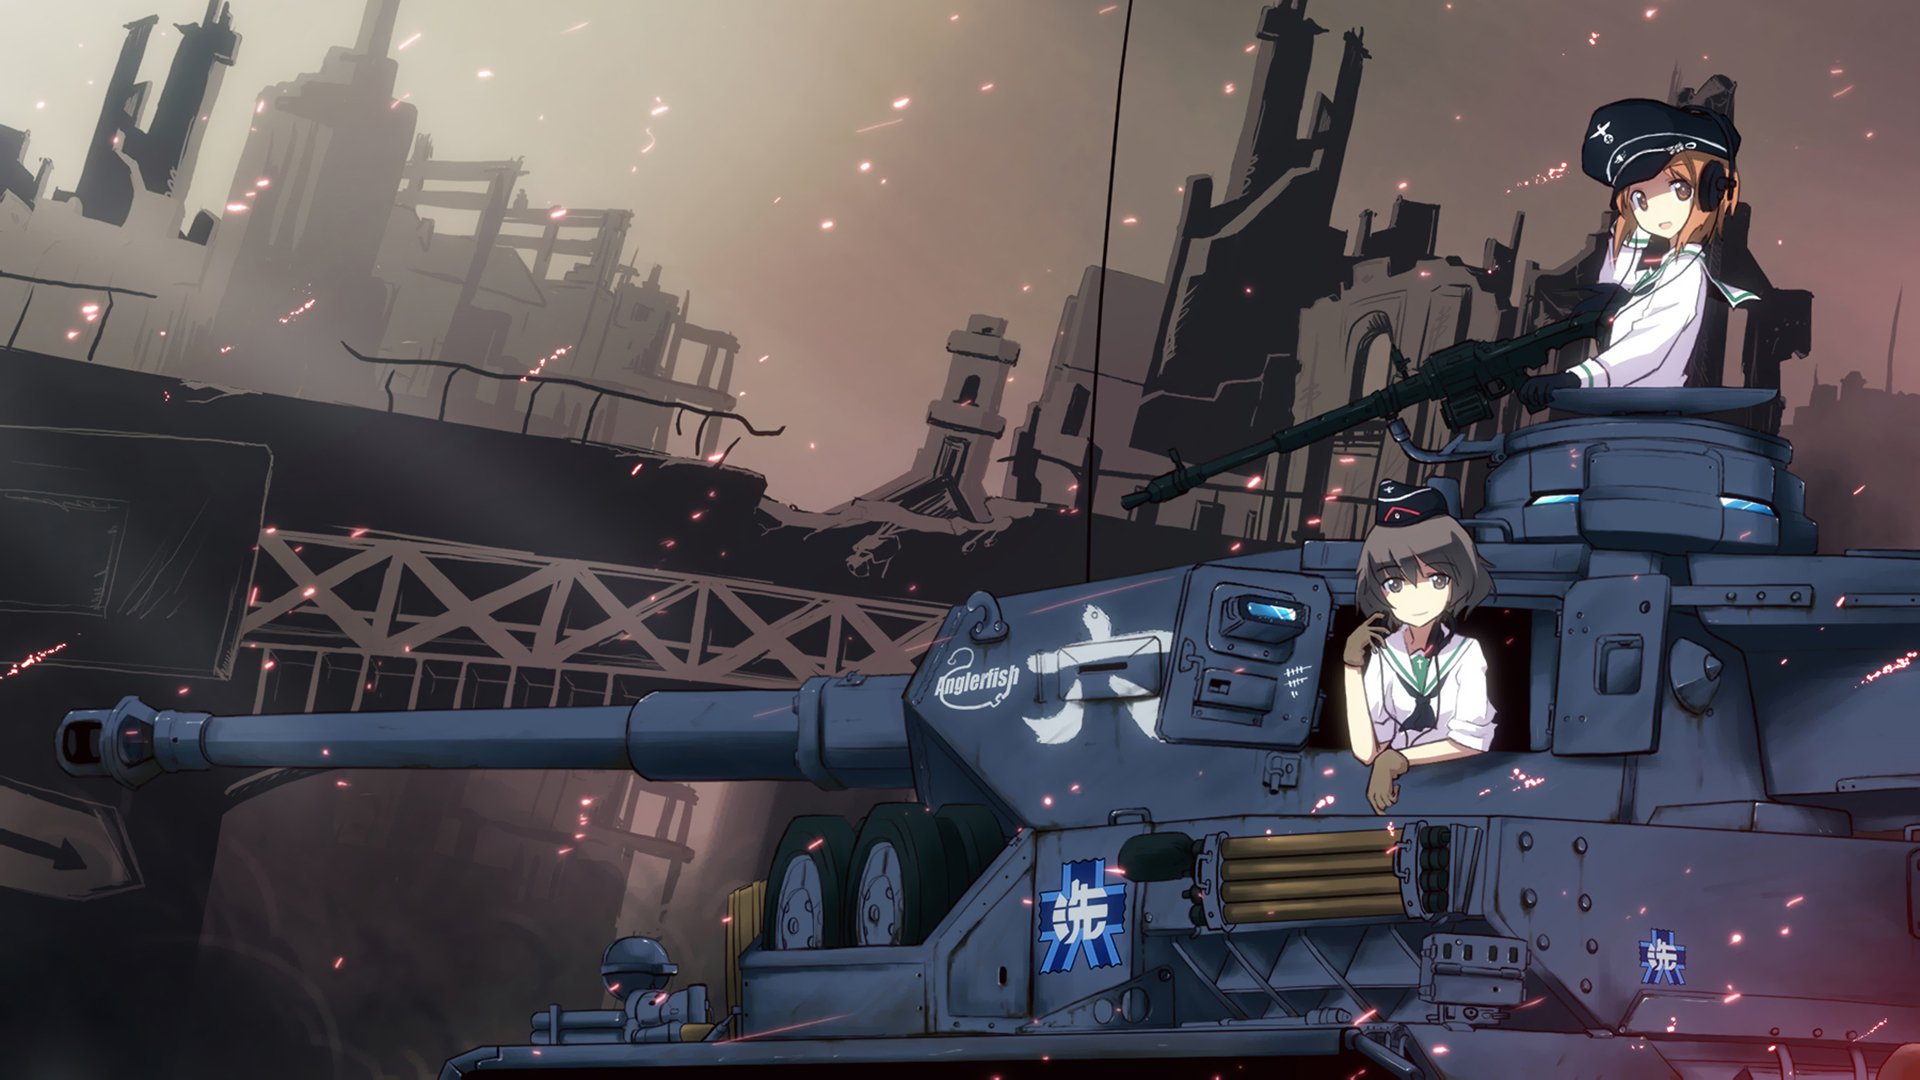 Wallpaper Tiger Aircraft War Military Anime Art Tank Anime Tiger  War Tank Military Vehicle Girls and Panzer Anime girls Anime girls  images for desktop section сёдзё  download